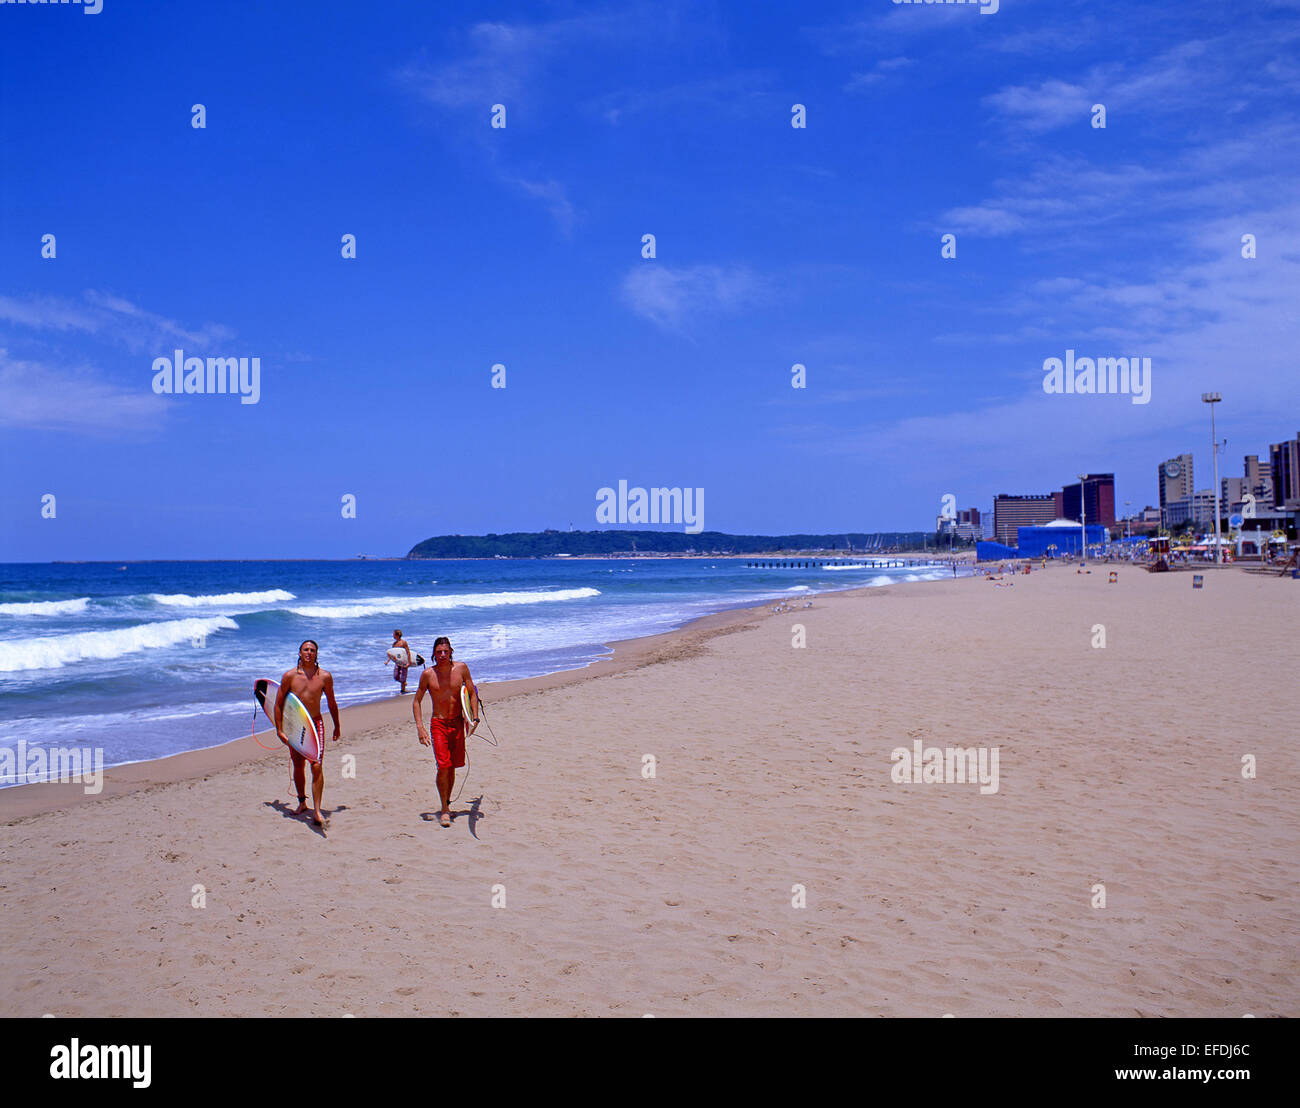 Surfers on 'The Golden Mile' beachfront, Durban, KwaZulu-Natal province, South Africa Stock Photo